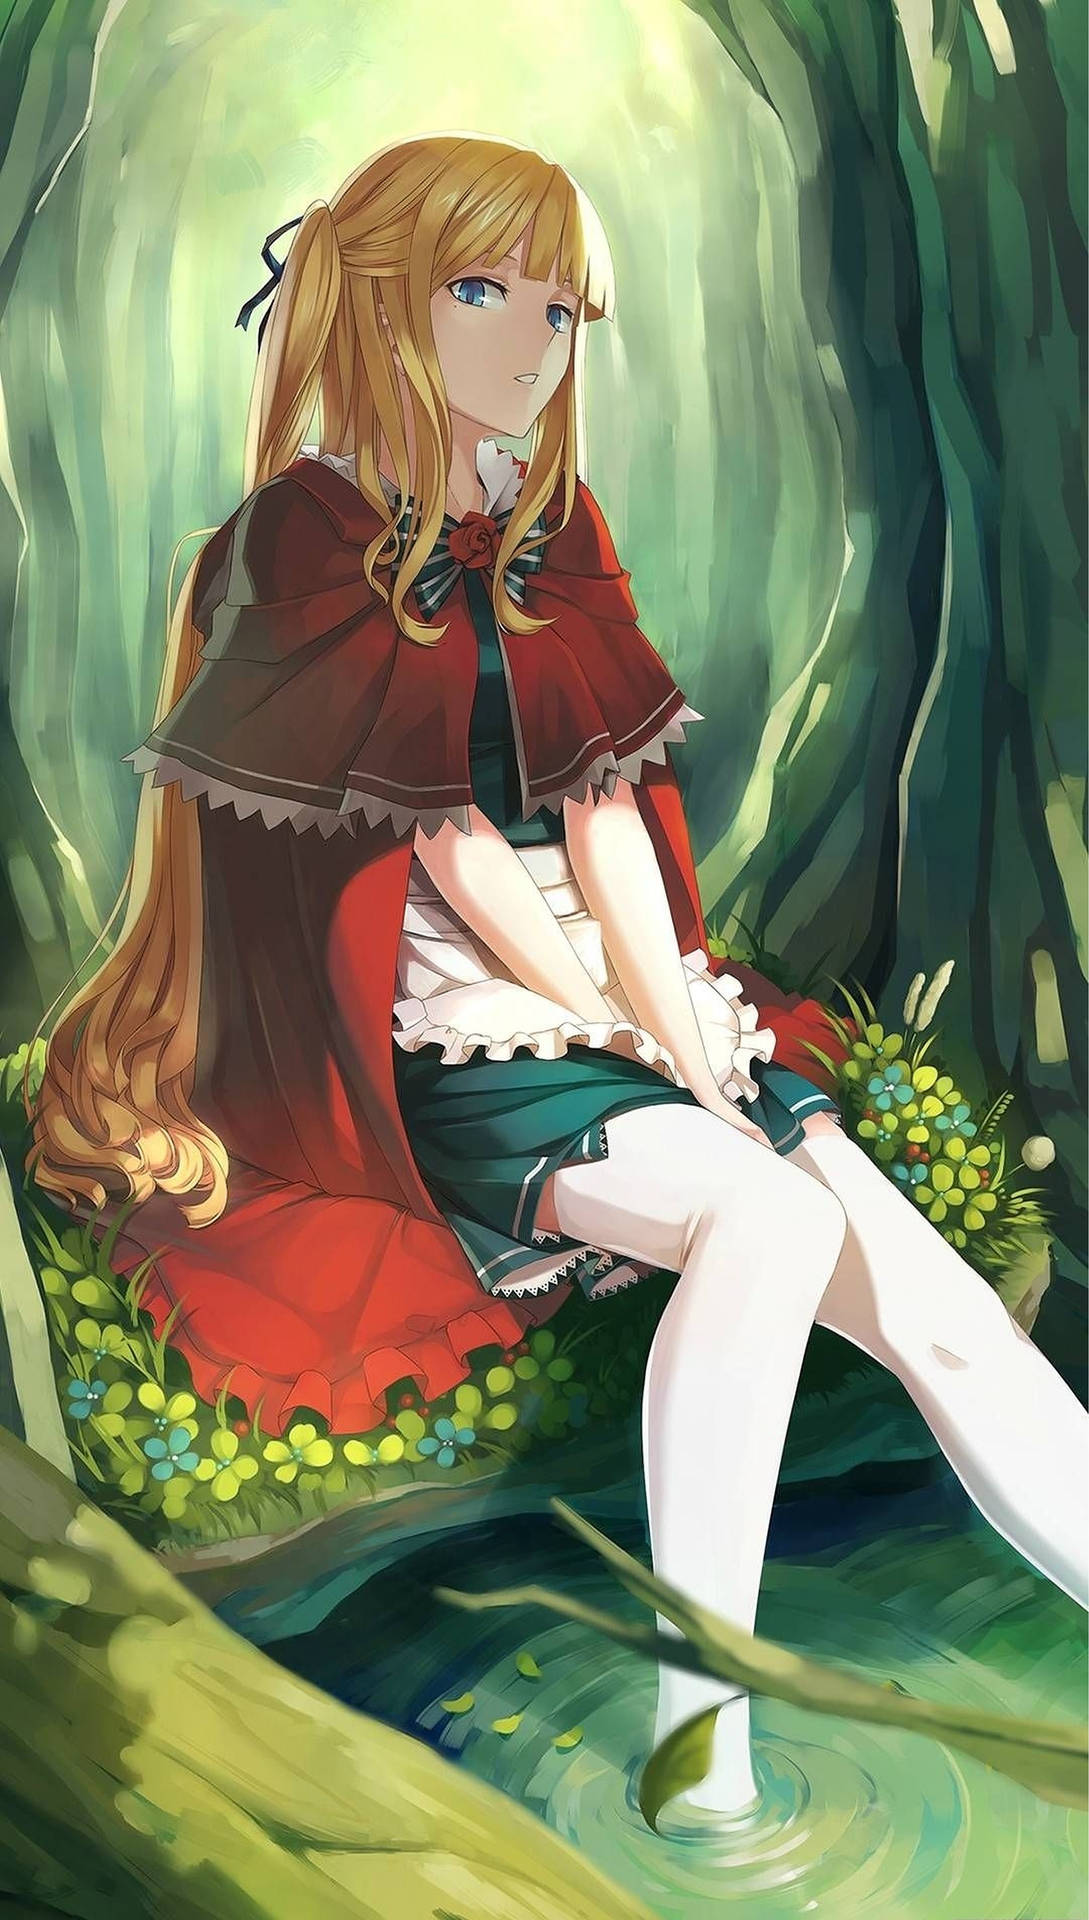 Anime Girl In Forest IPhone Wallpaper